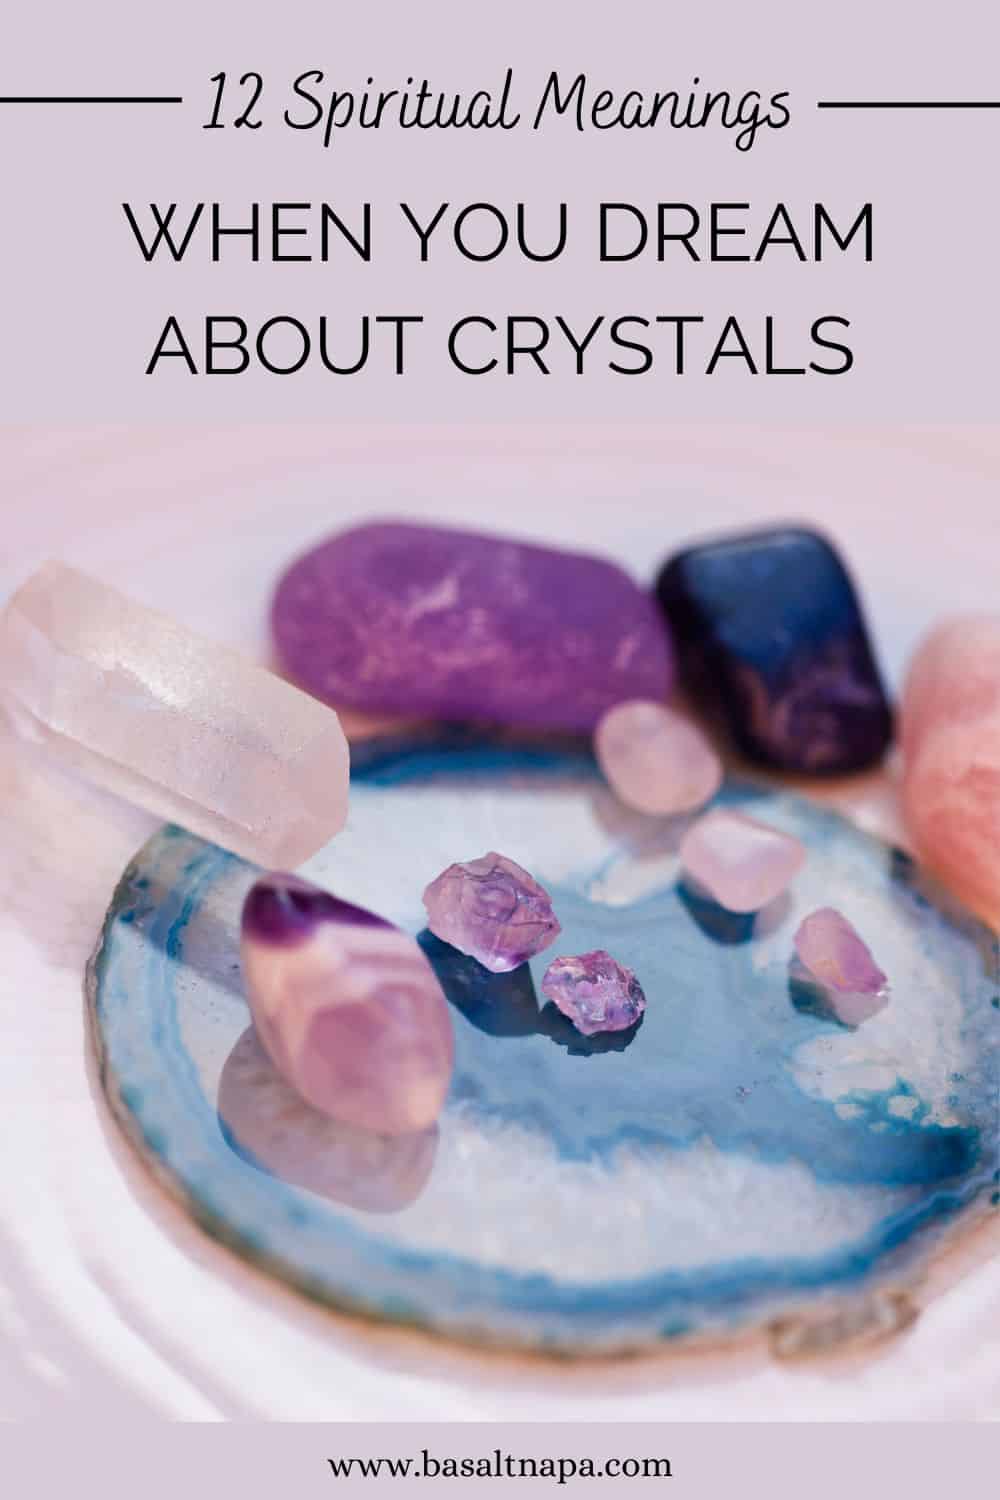 12 Spiritual Meanings When You Dream About Crystals